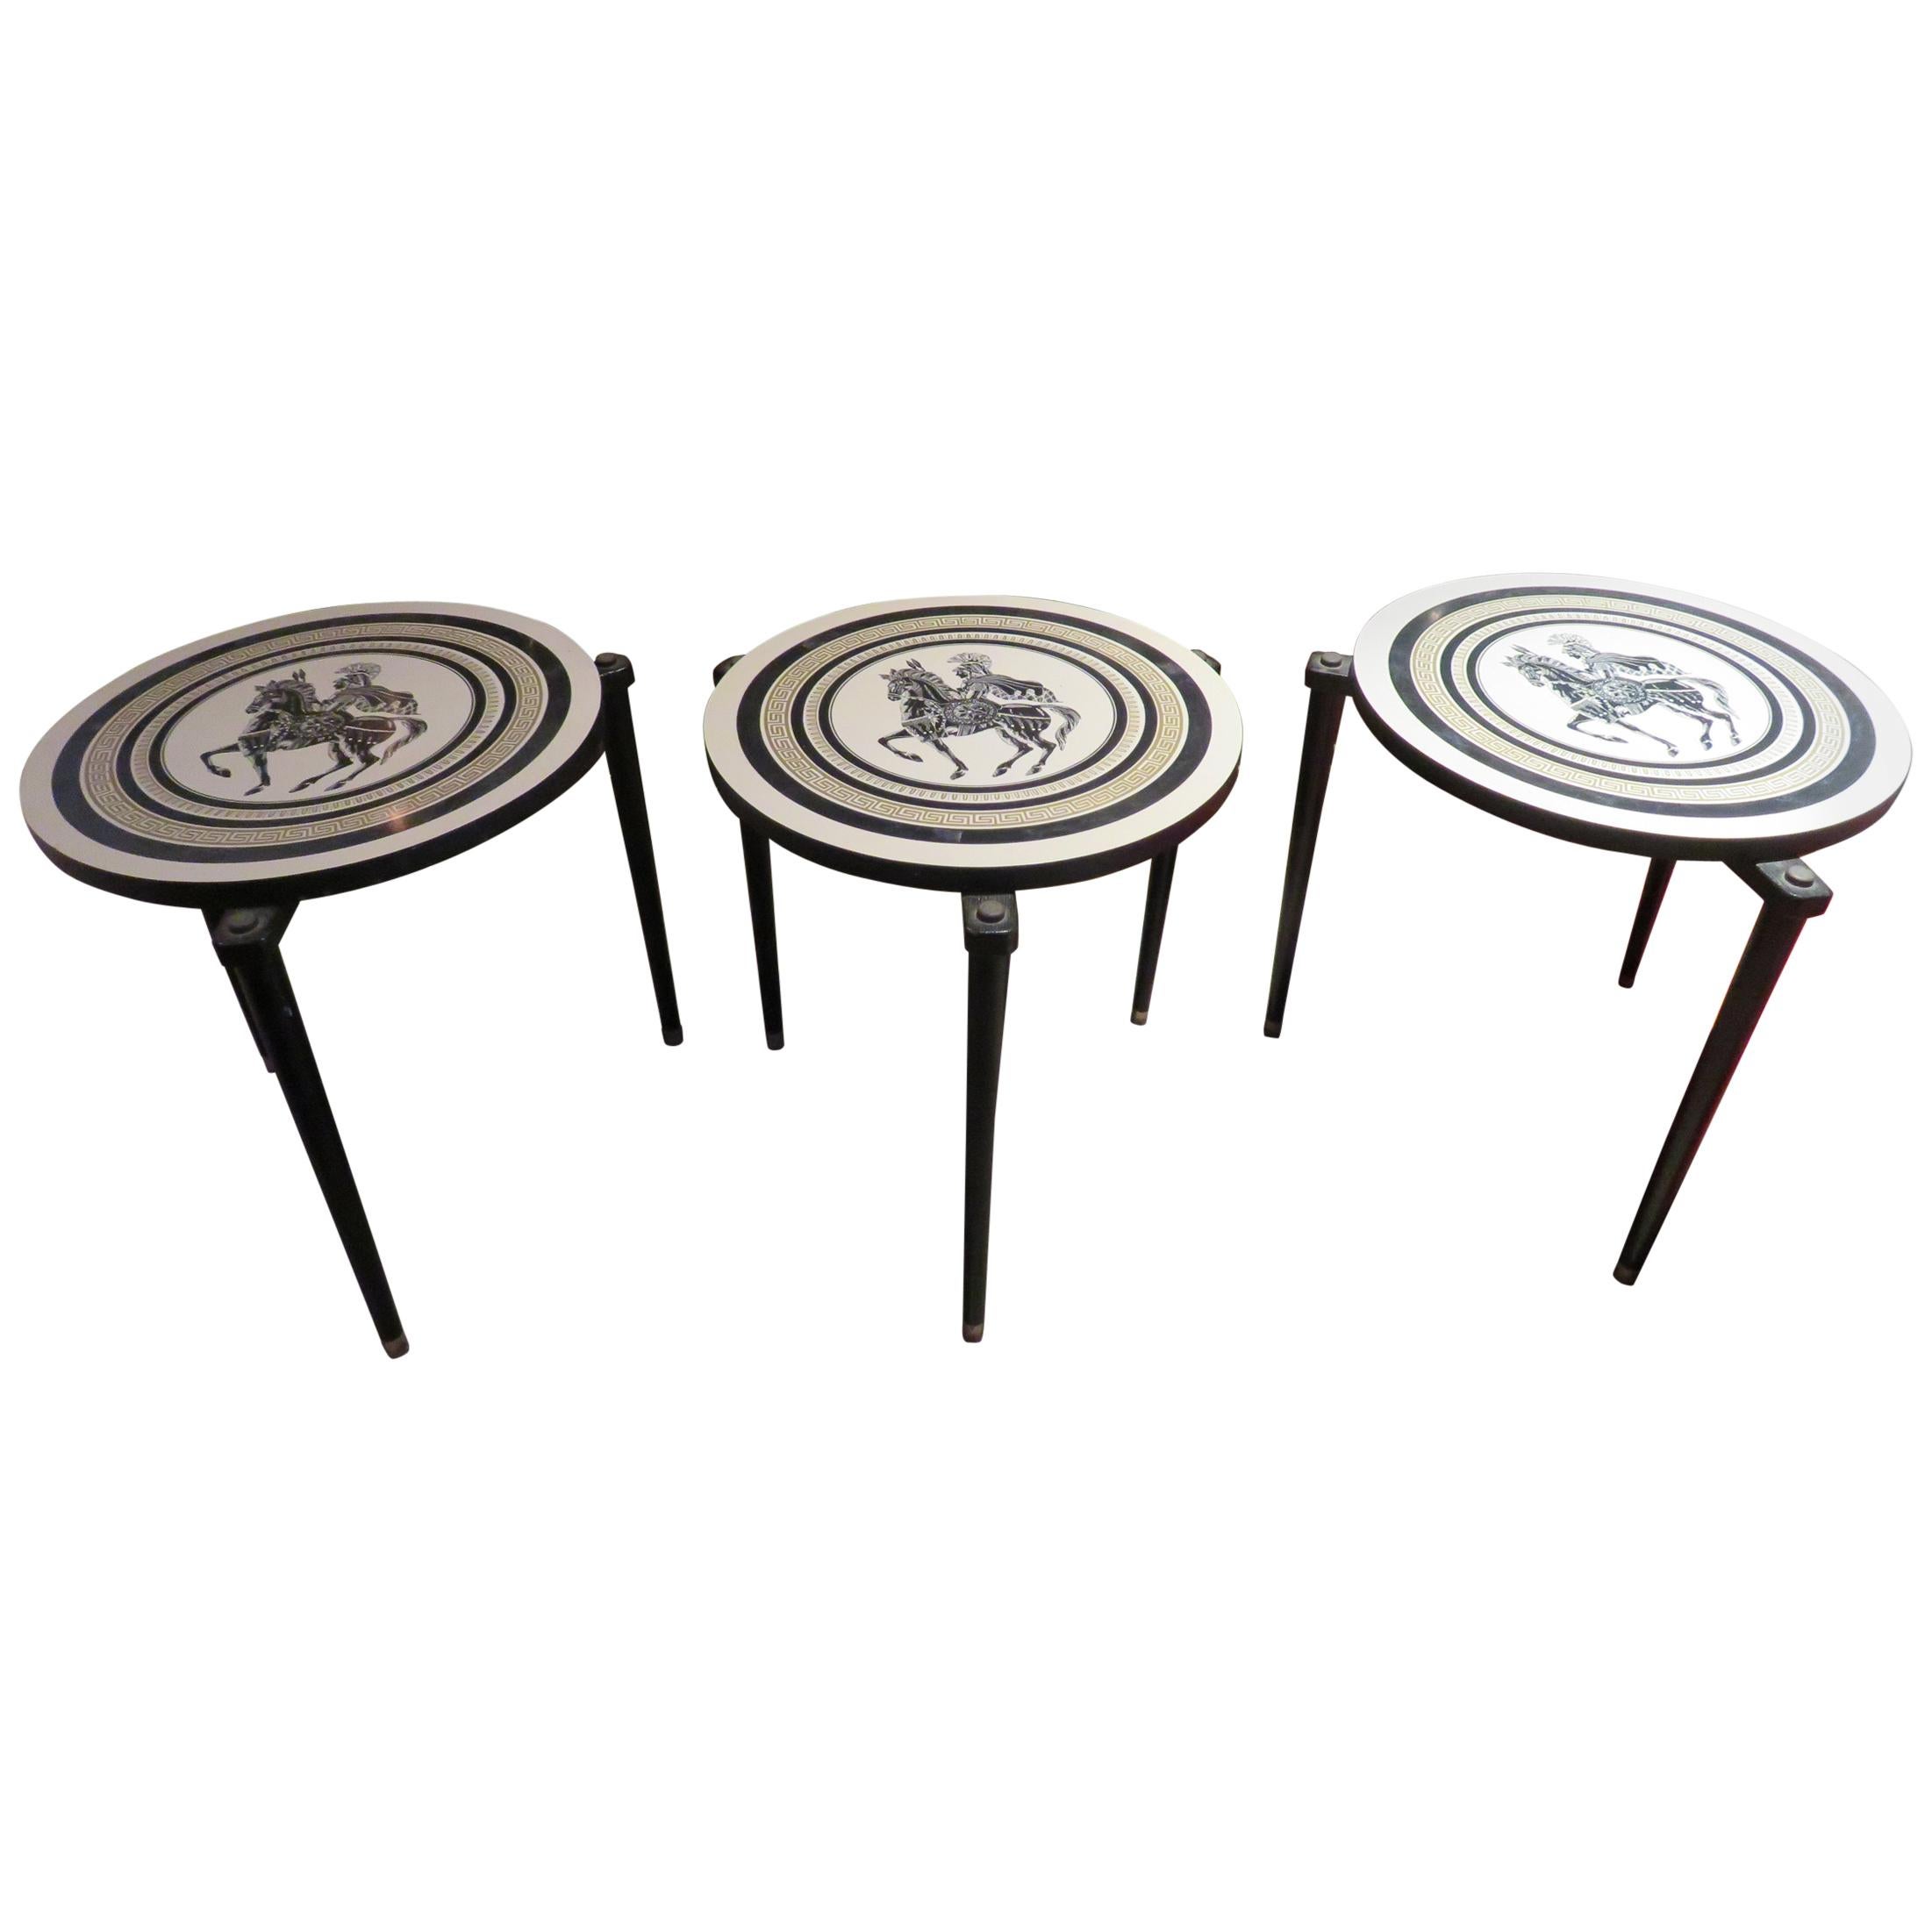 Charming Set of 3 Piero Fornasetti Style Stack Nesting Table Mid-Century Modern For Sale